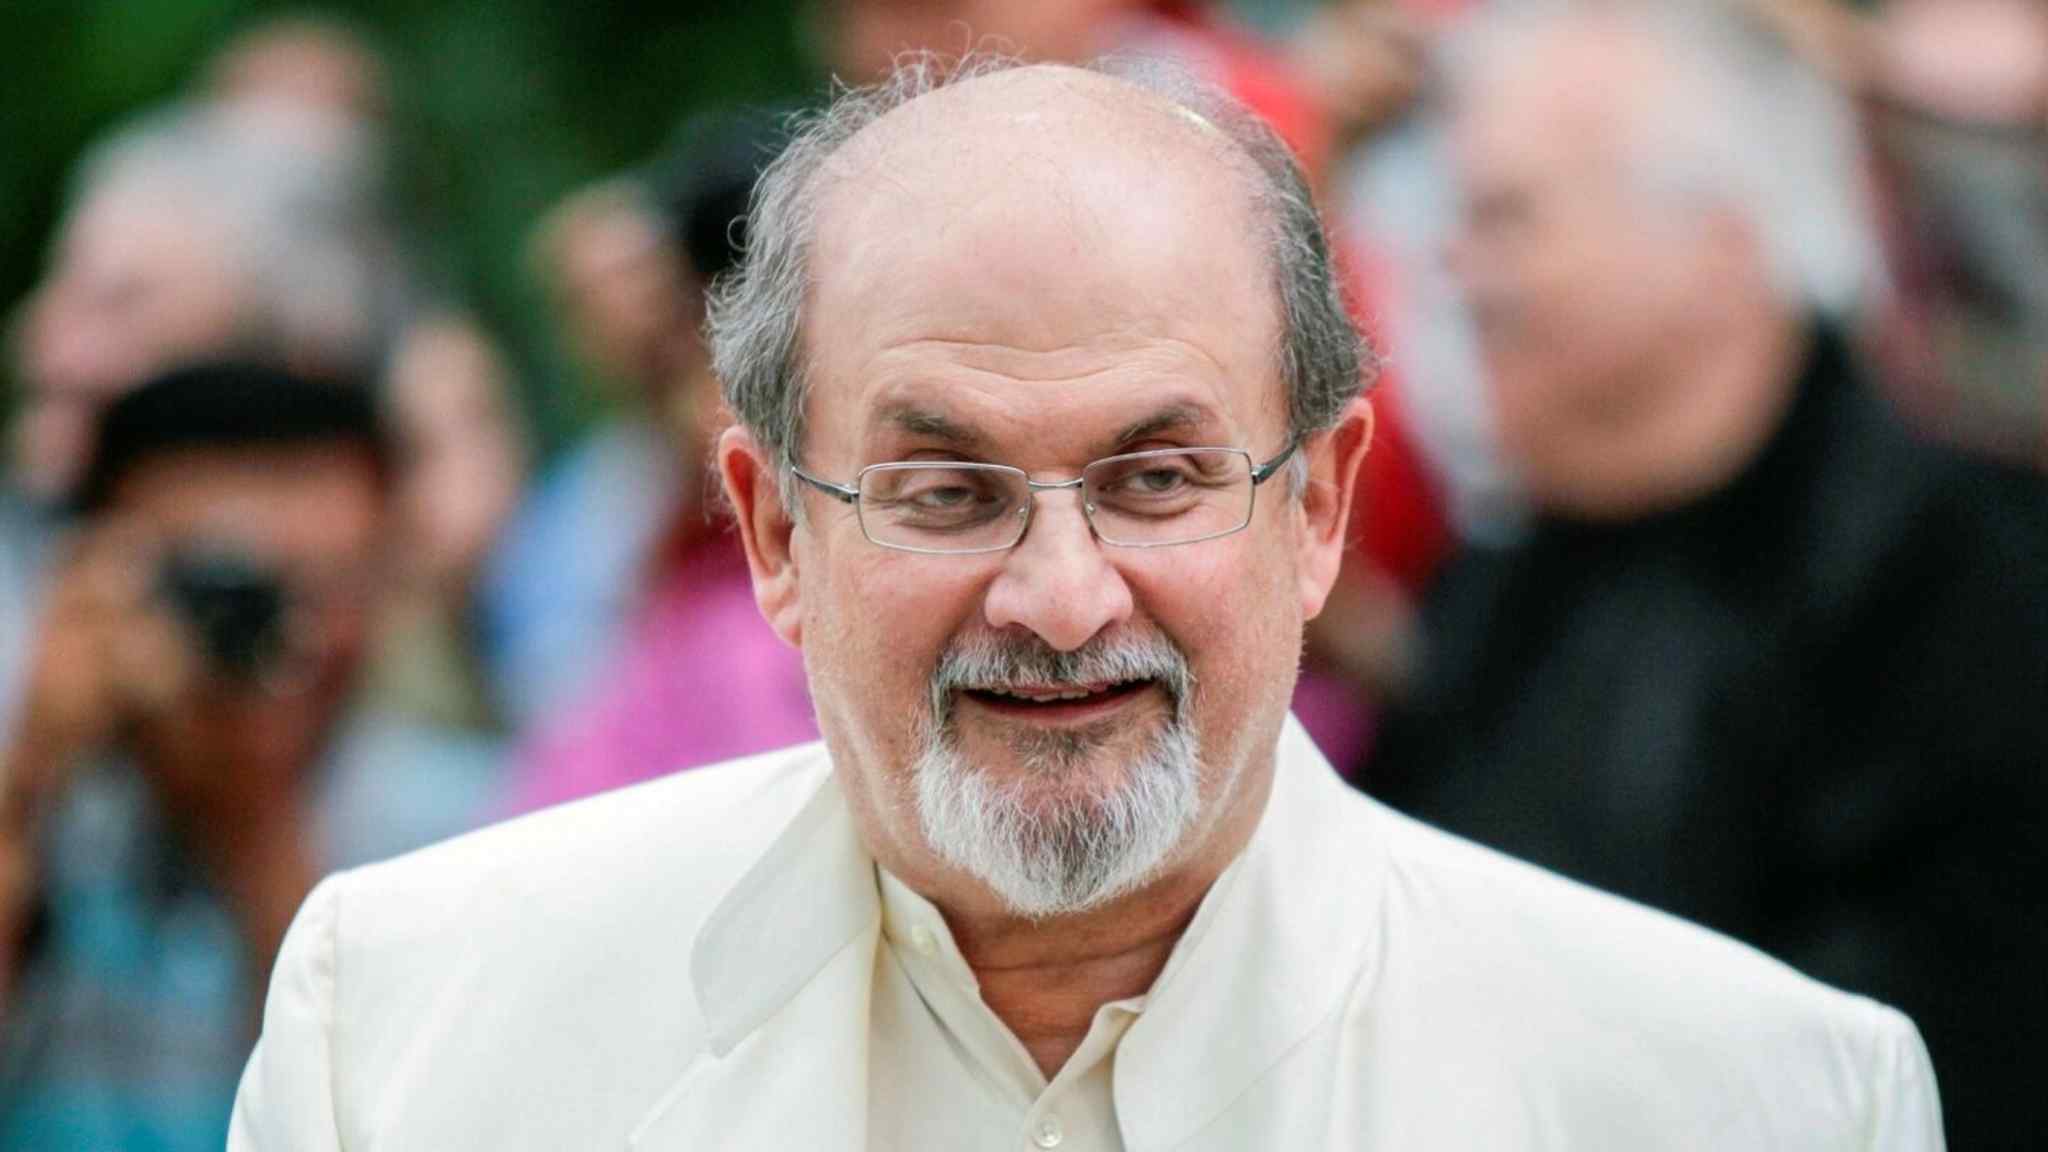 Salman Rushdie on ‘road to recovery’ after stabbing, agent says